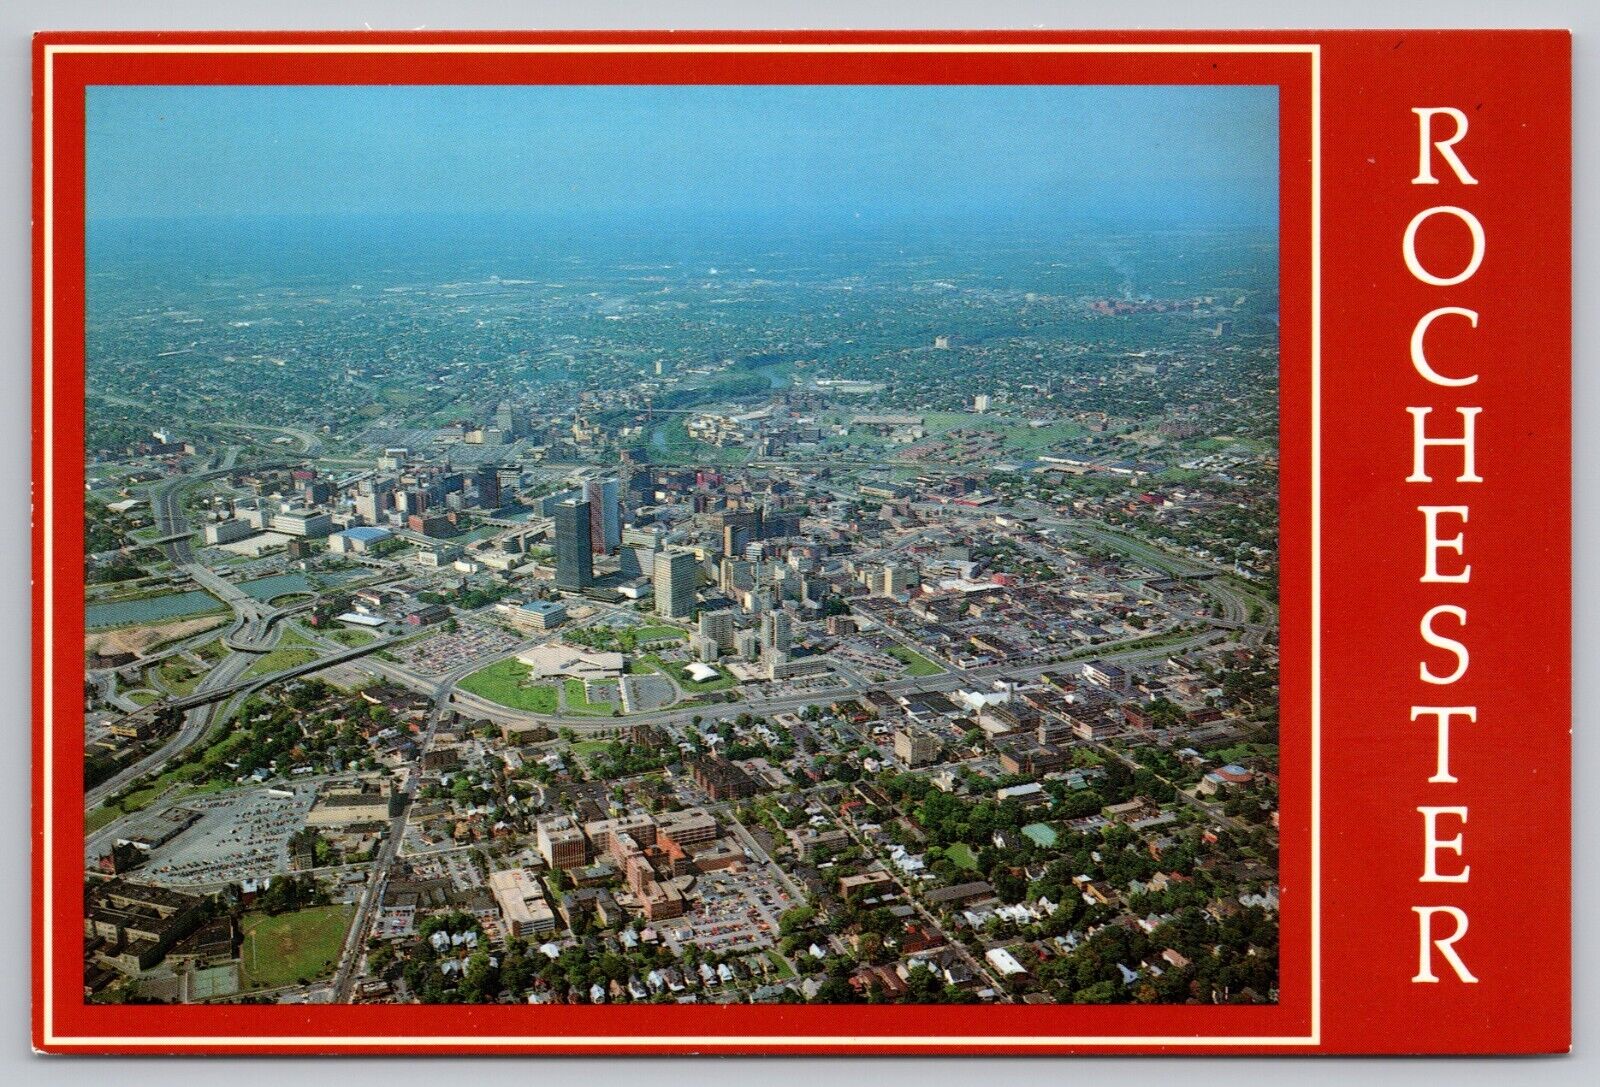 Postcard - Rochester, New York - Aerial View - c 1980s/90s, Unposted, 4x6 (M7b)